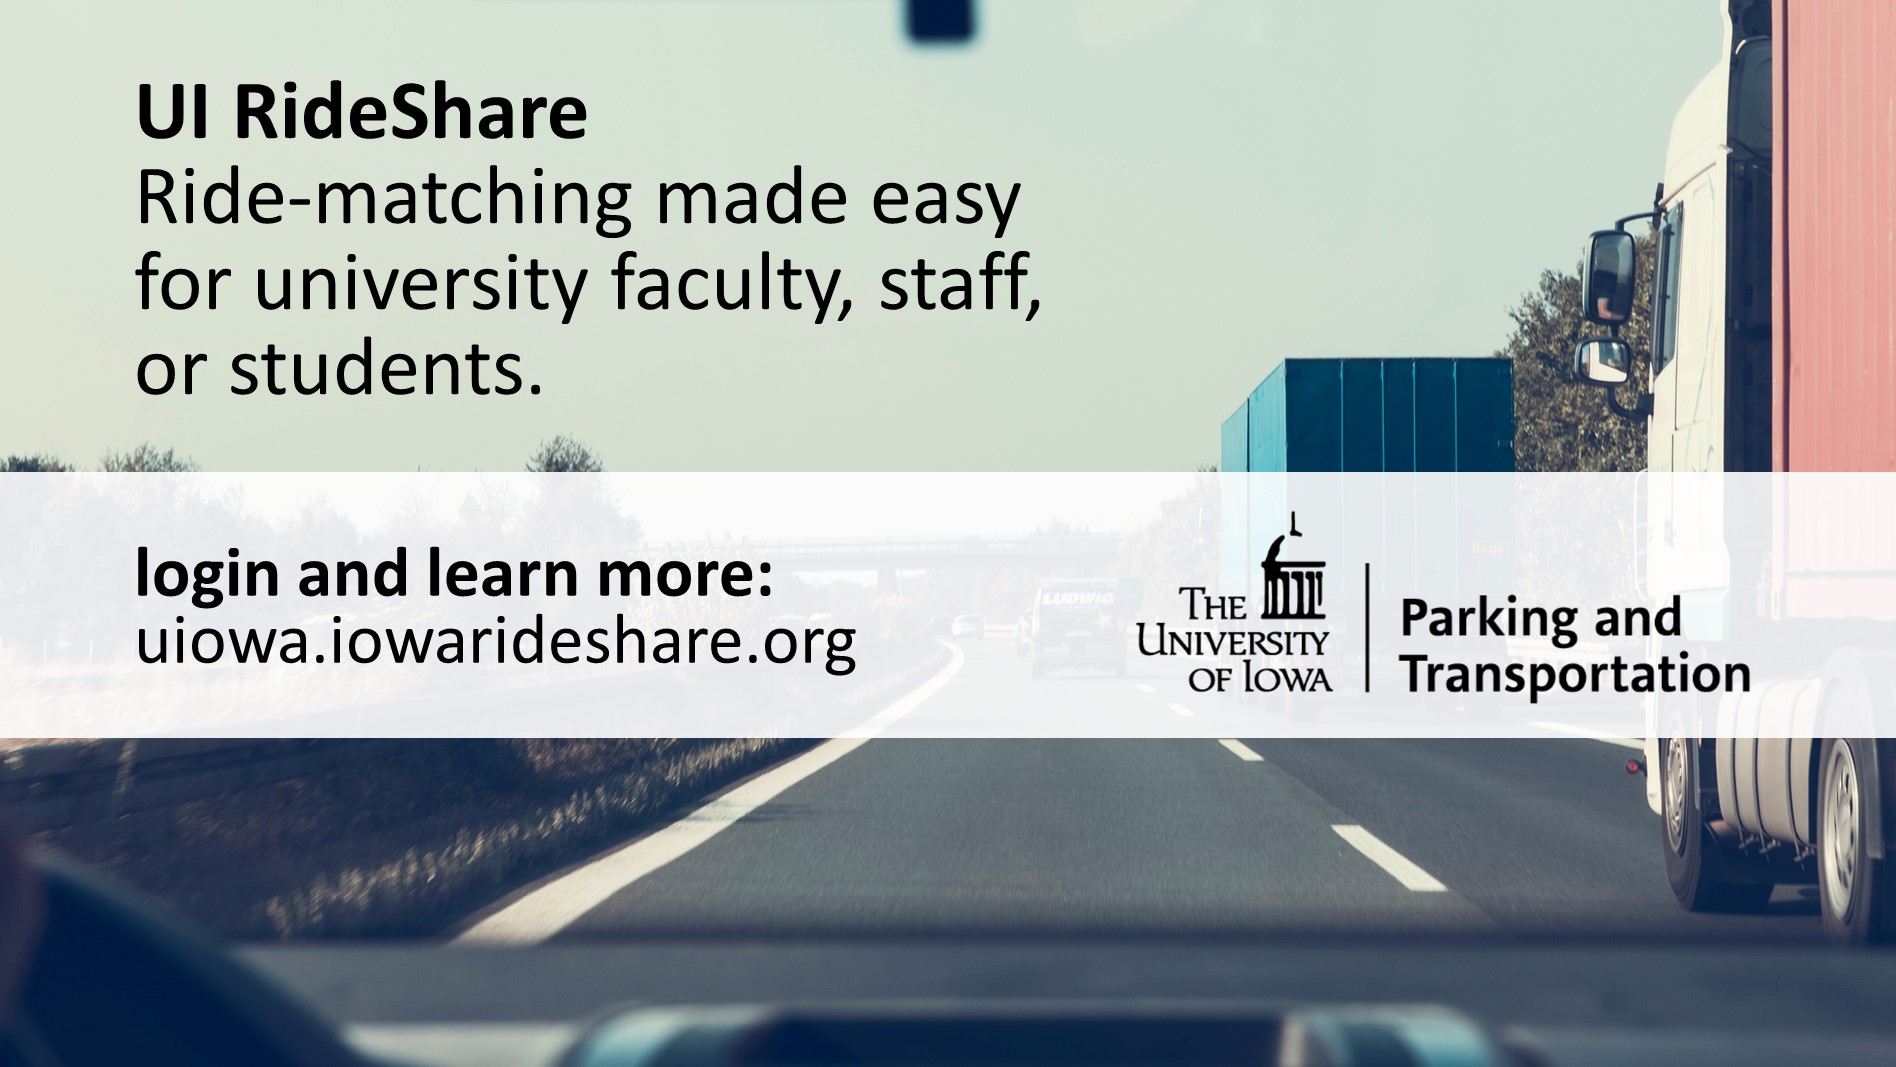 UI RideShare: Ride-matching made easy for university faculty, staff, or students. Login and learn more at uiowa.iowarideshare.org.